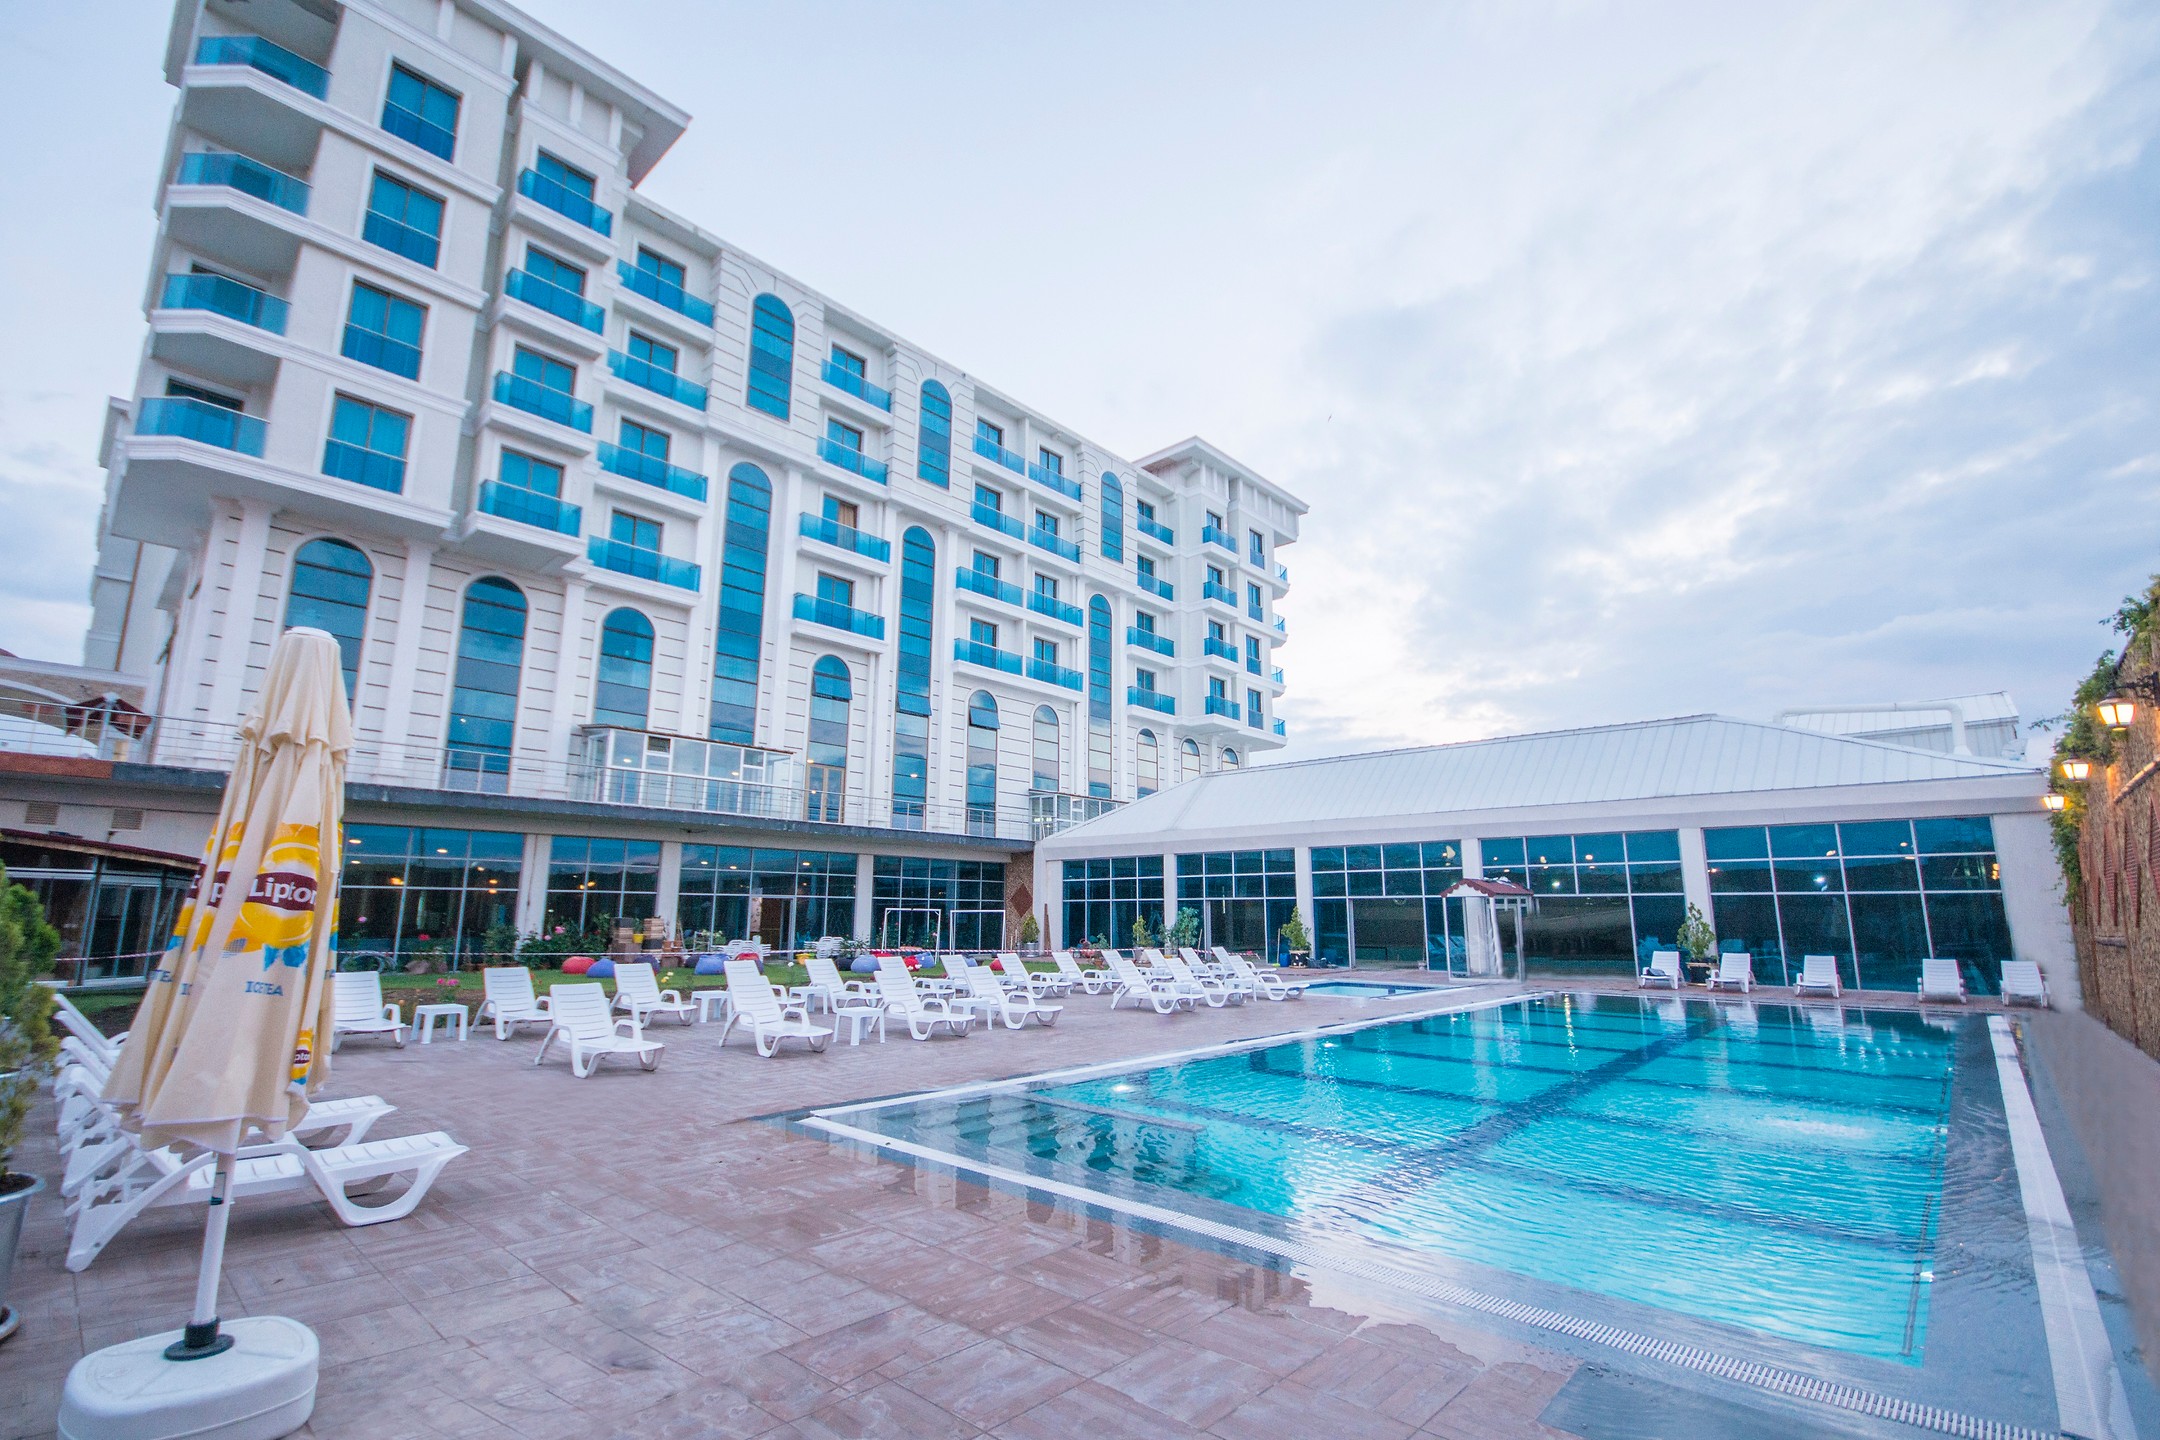 Budan Thermal Spa Hotel & Convention Center